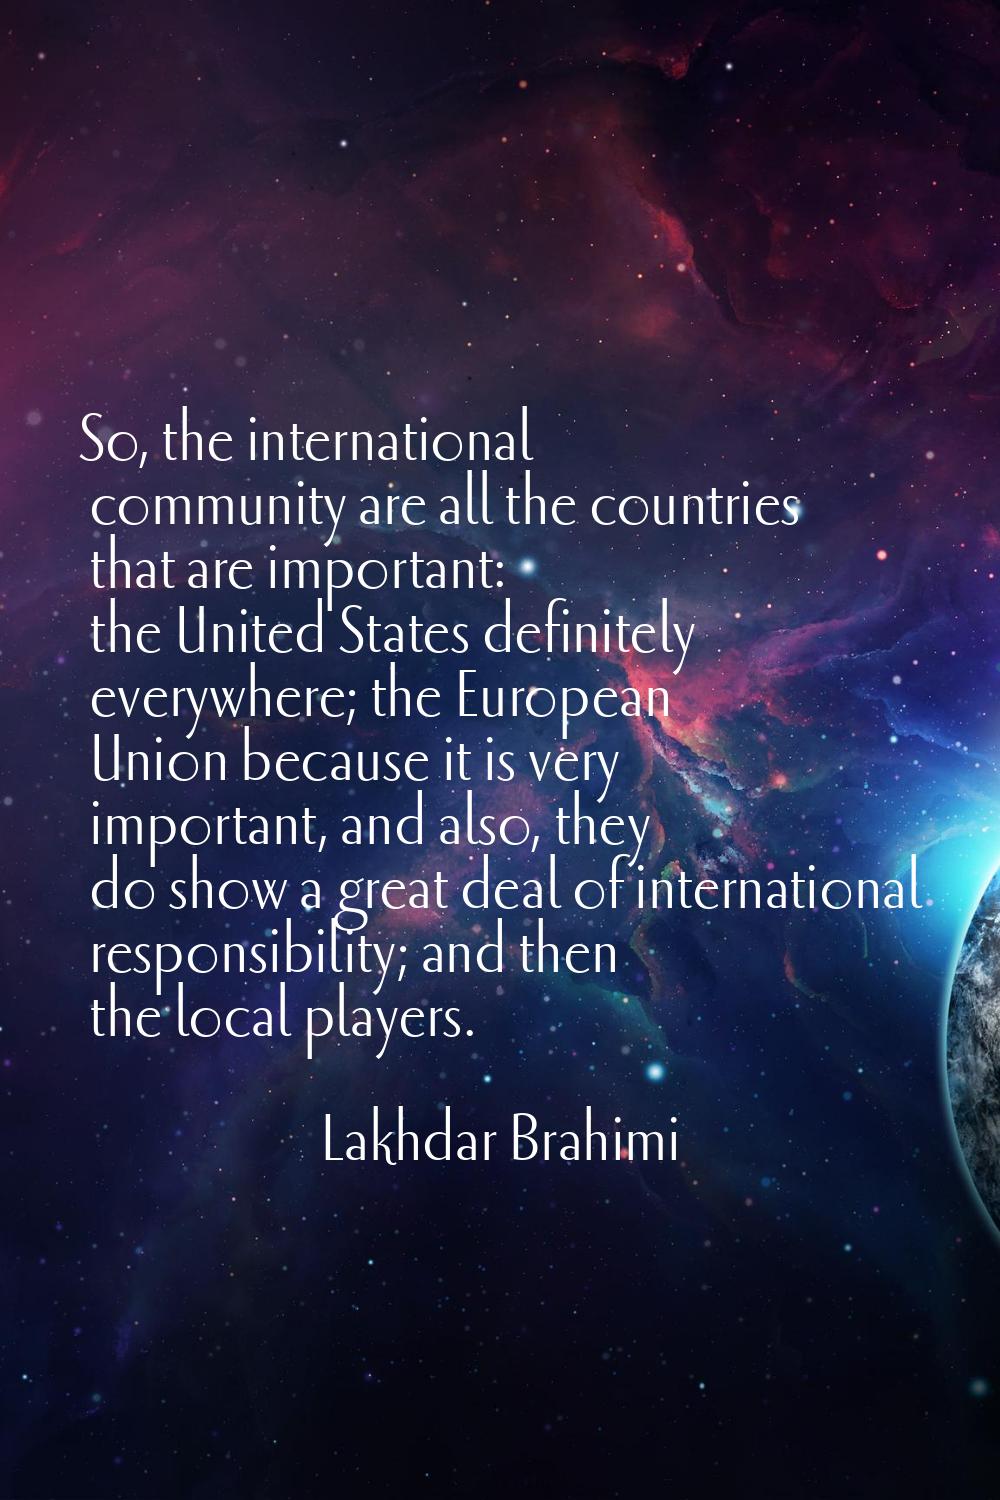 So, the international community are all the countries that are important: the United States definit